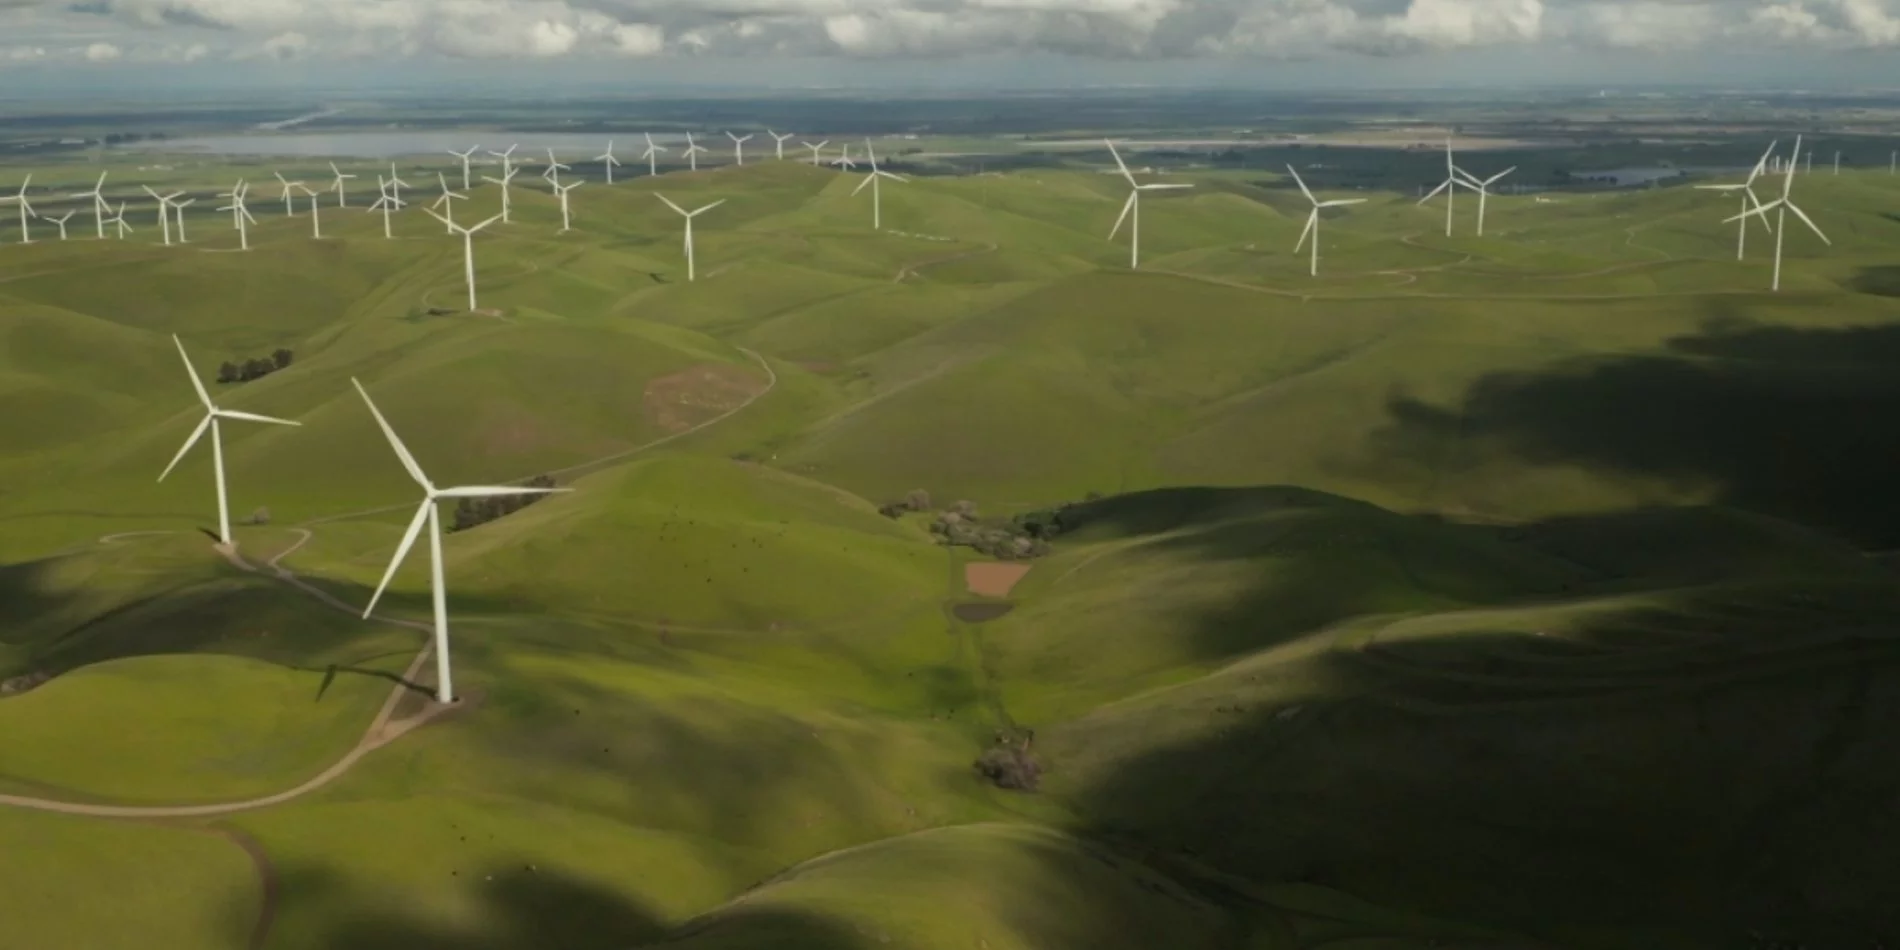 Image of numerous windmills in a vast hilly landscape covered in green grass